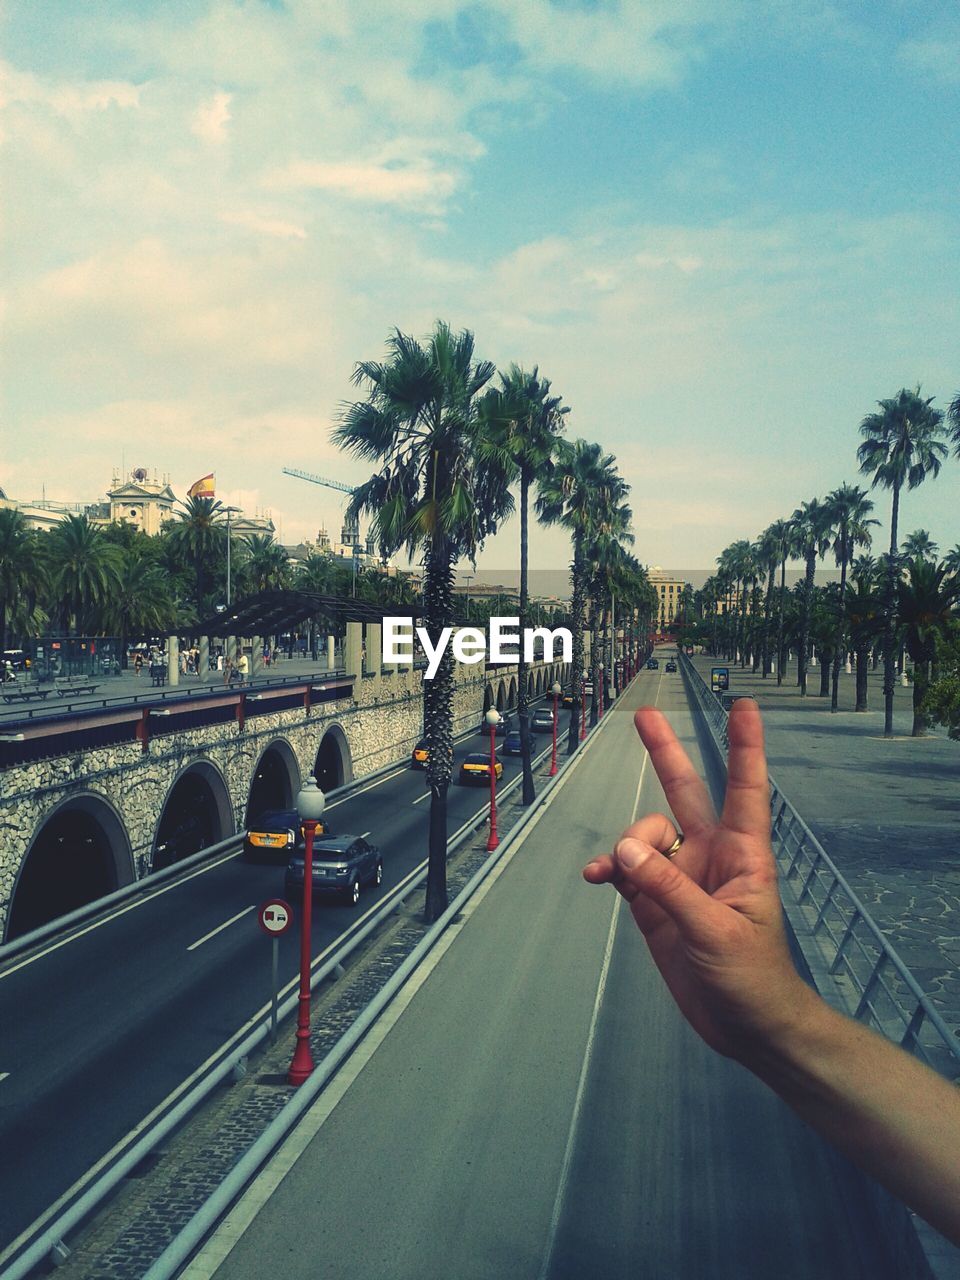 Cropped hand of person showing peace sign over road against sky